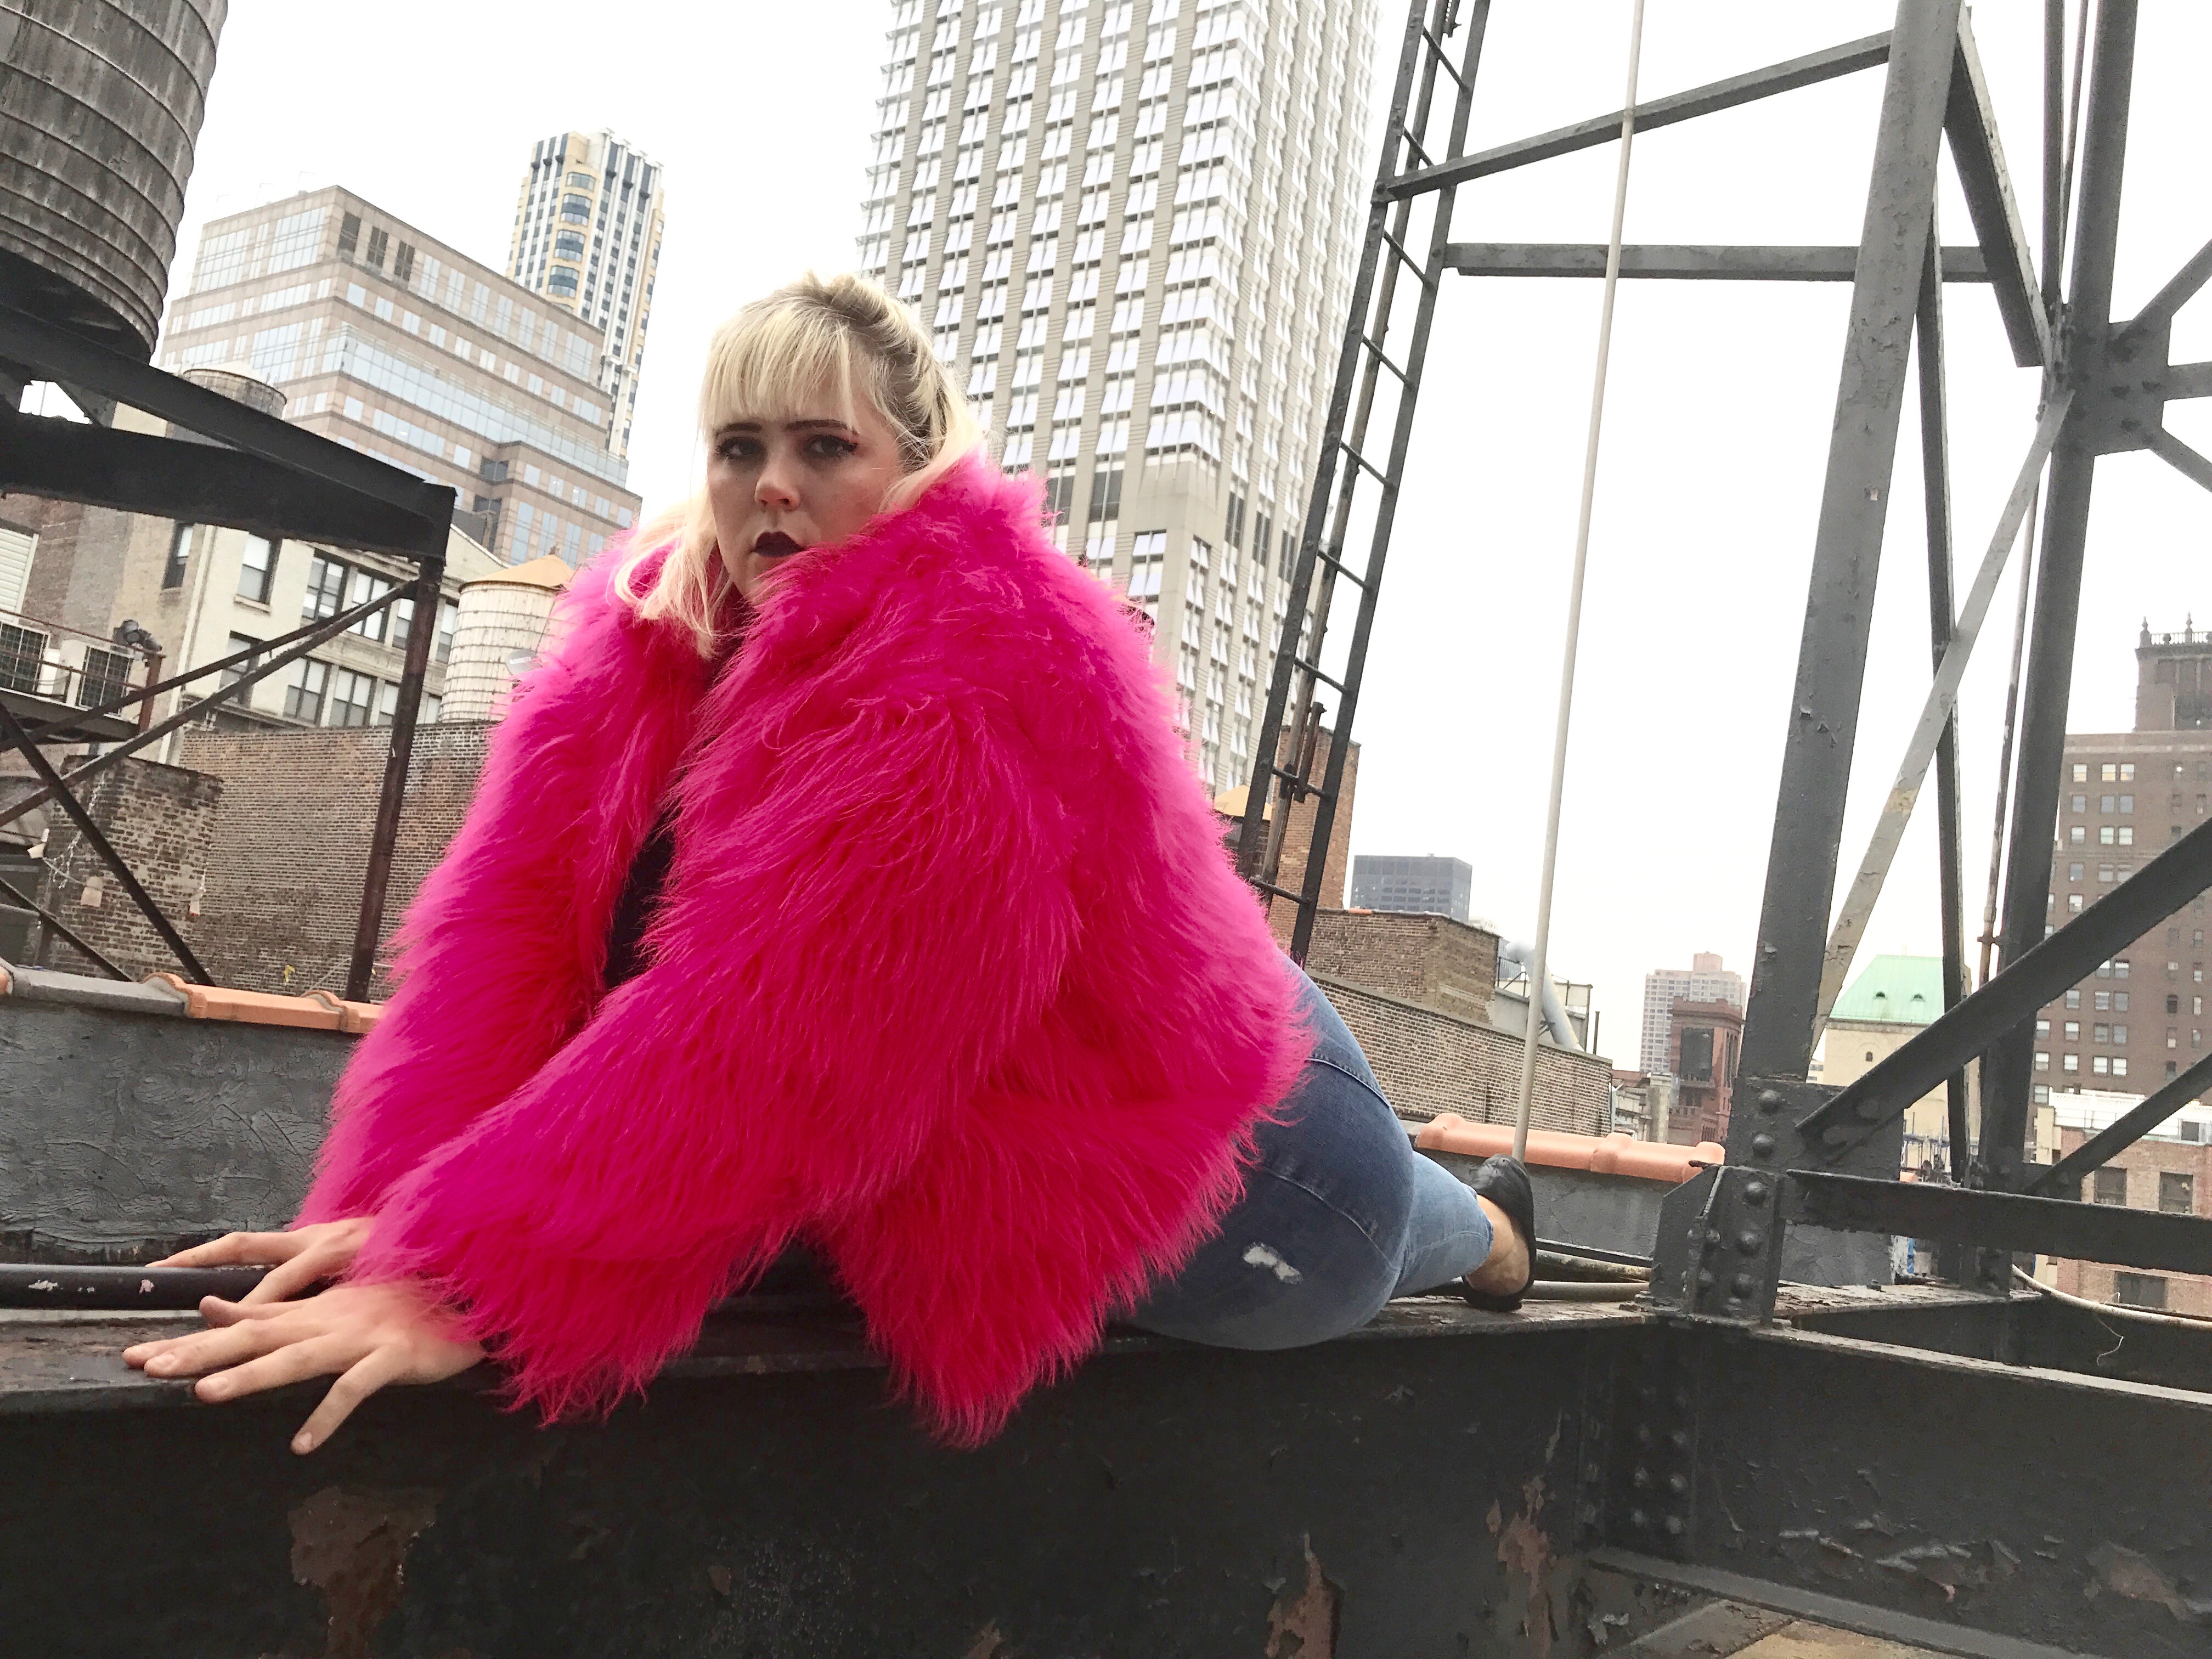 3 Things I Learned From Wearing A Hot Pink Fur Coat